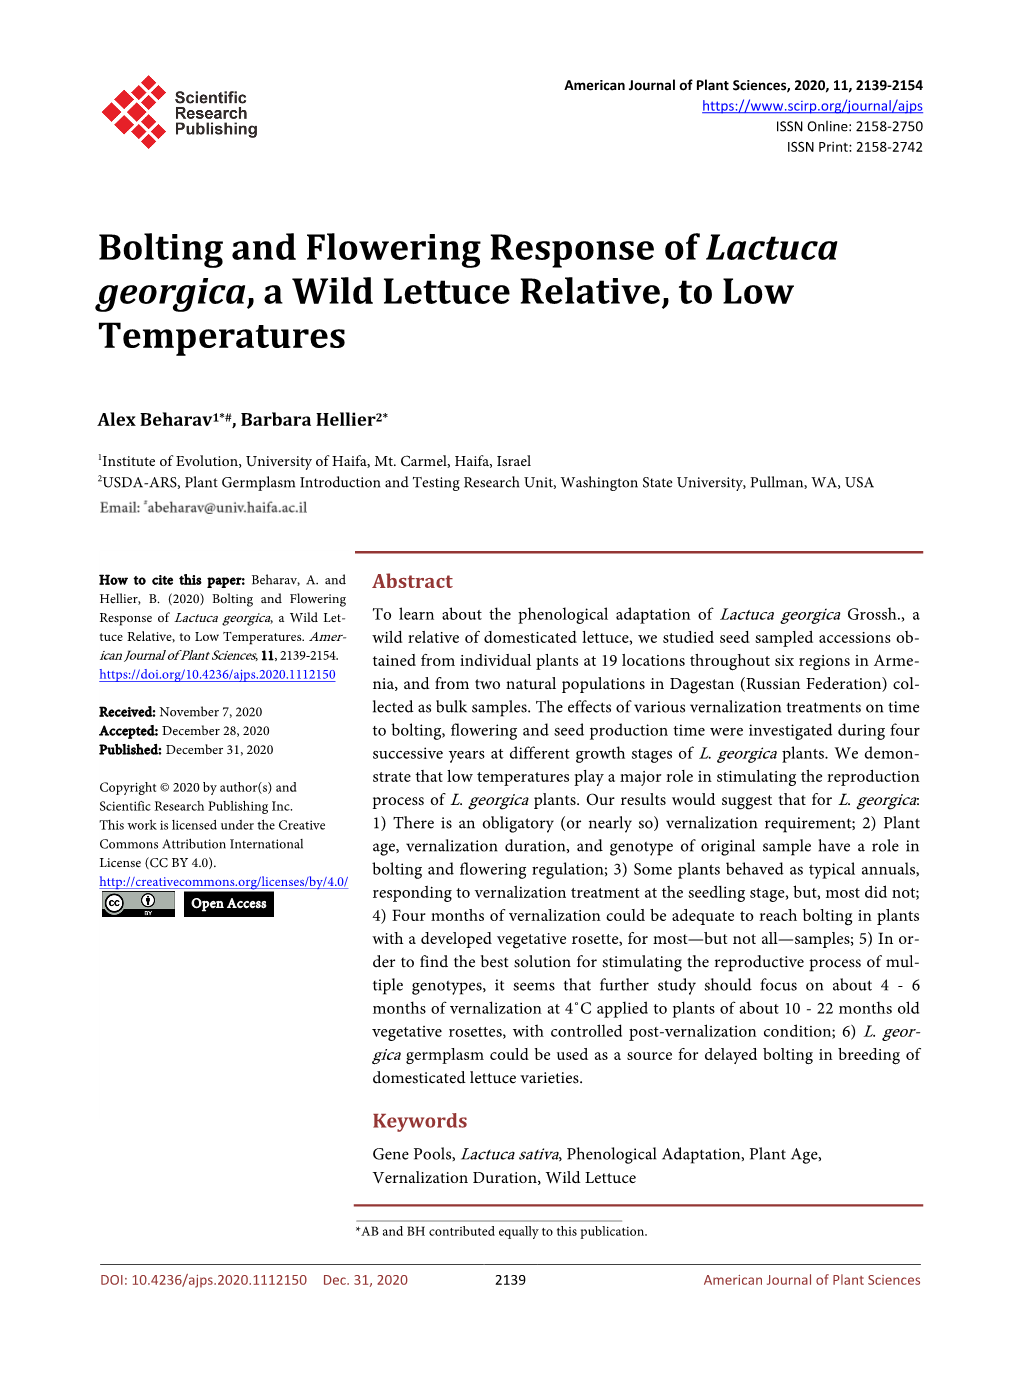 Bolting and Flowering Response of Lactuca Georgica, a Wild Lettuce Relative, to Low Temperatures